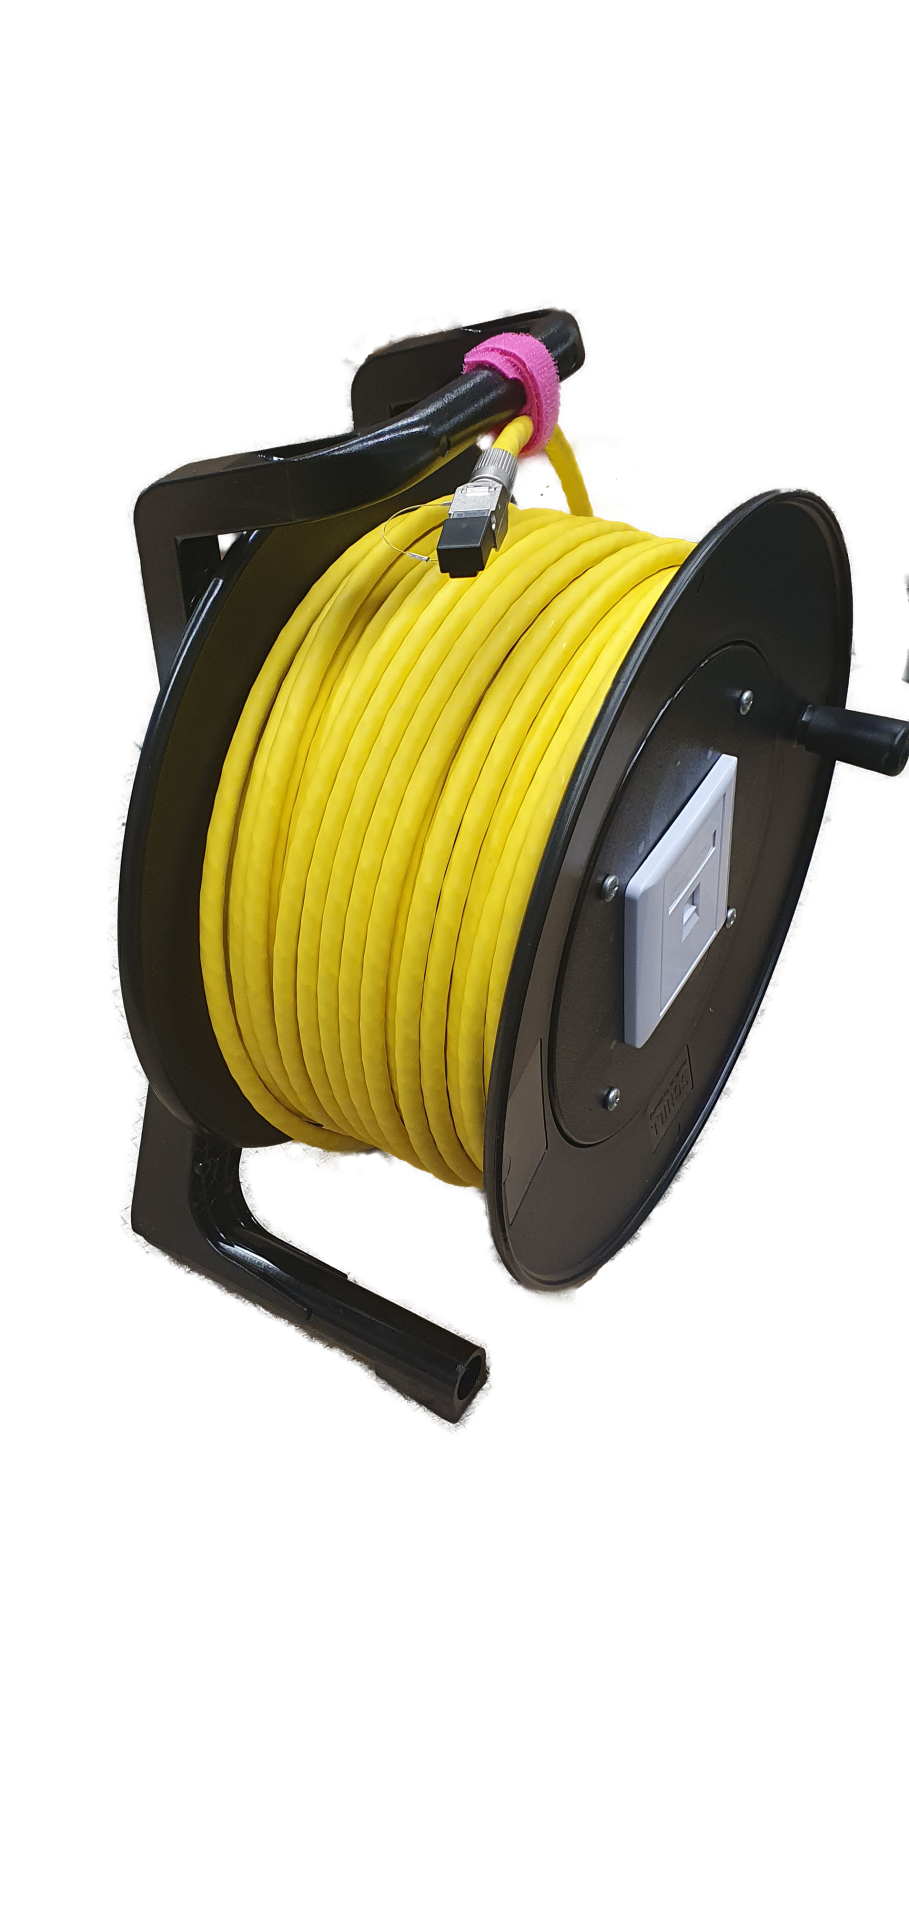 Cat.8.1/Class I Extension 25m, on cable drum